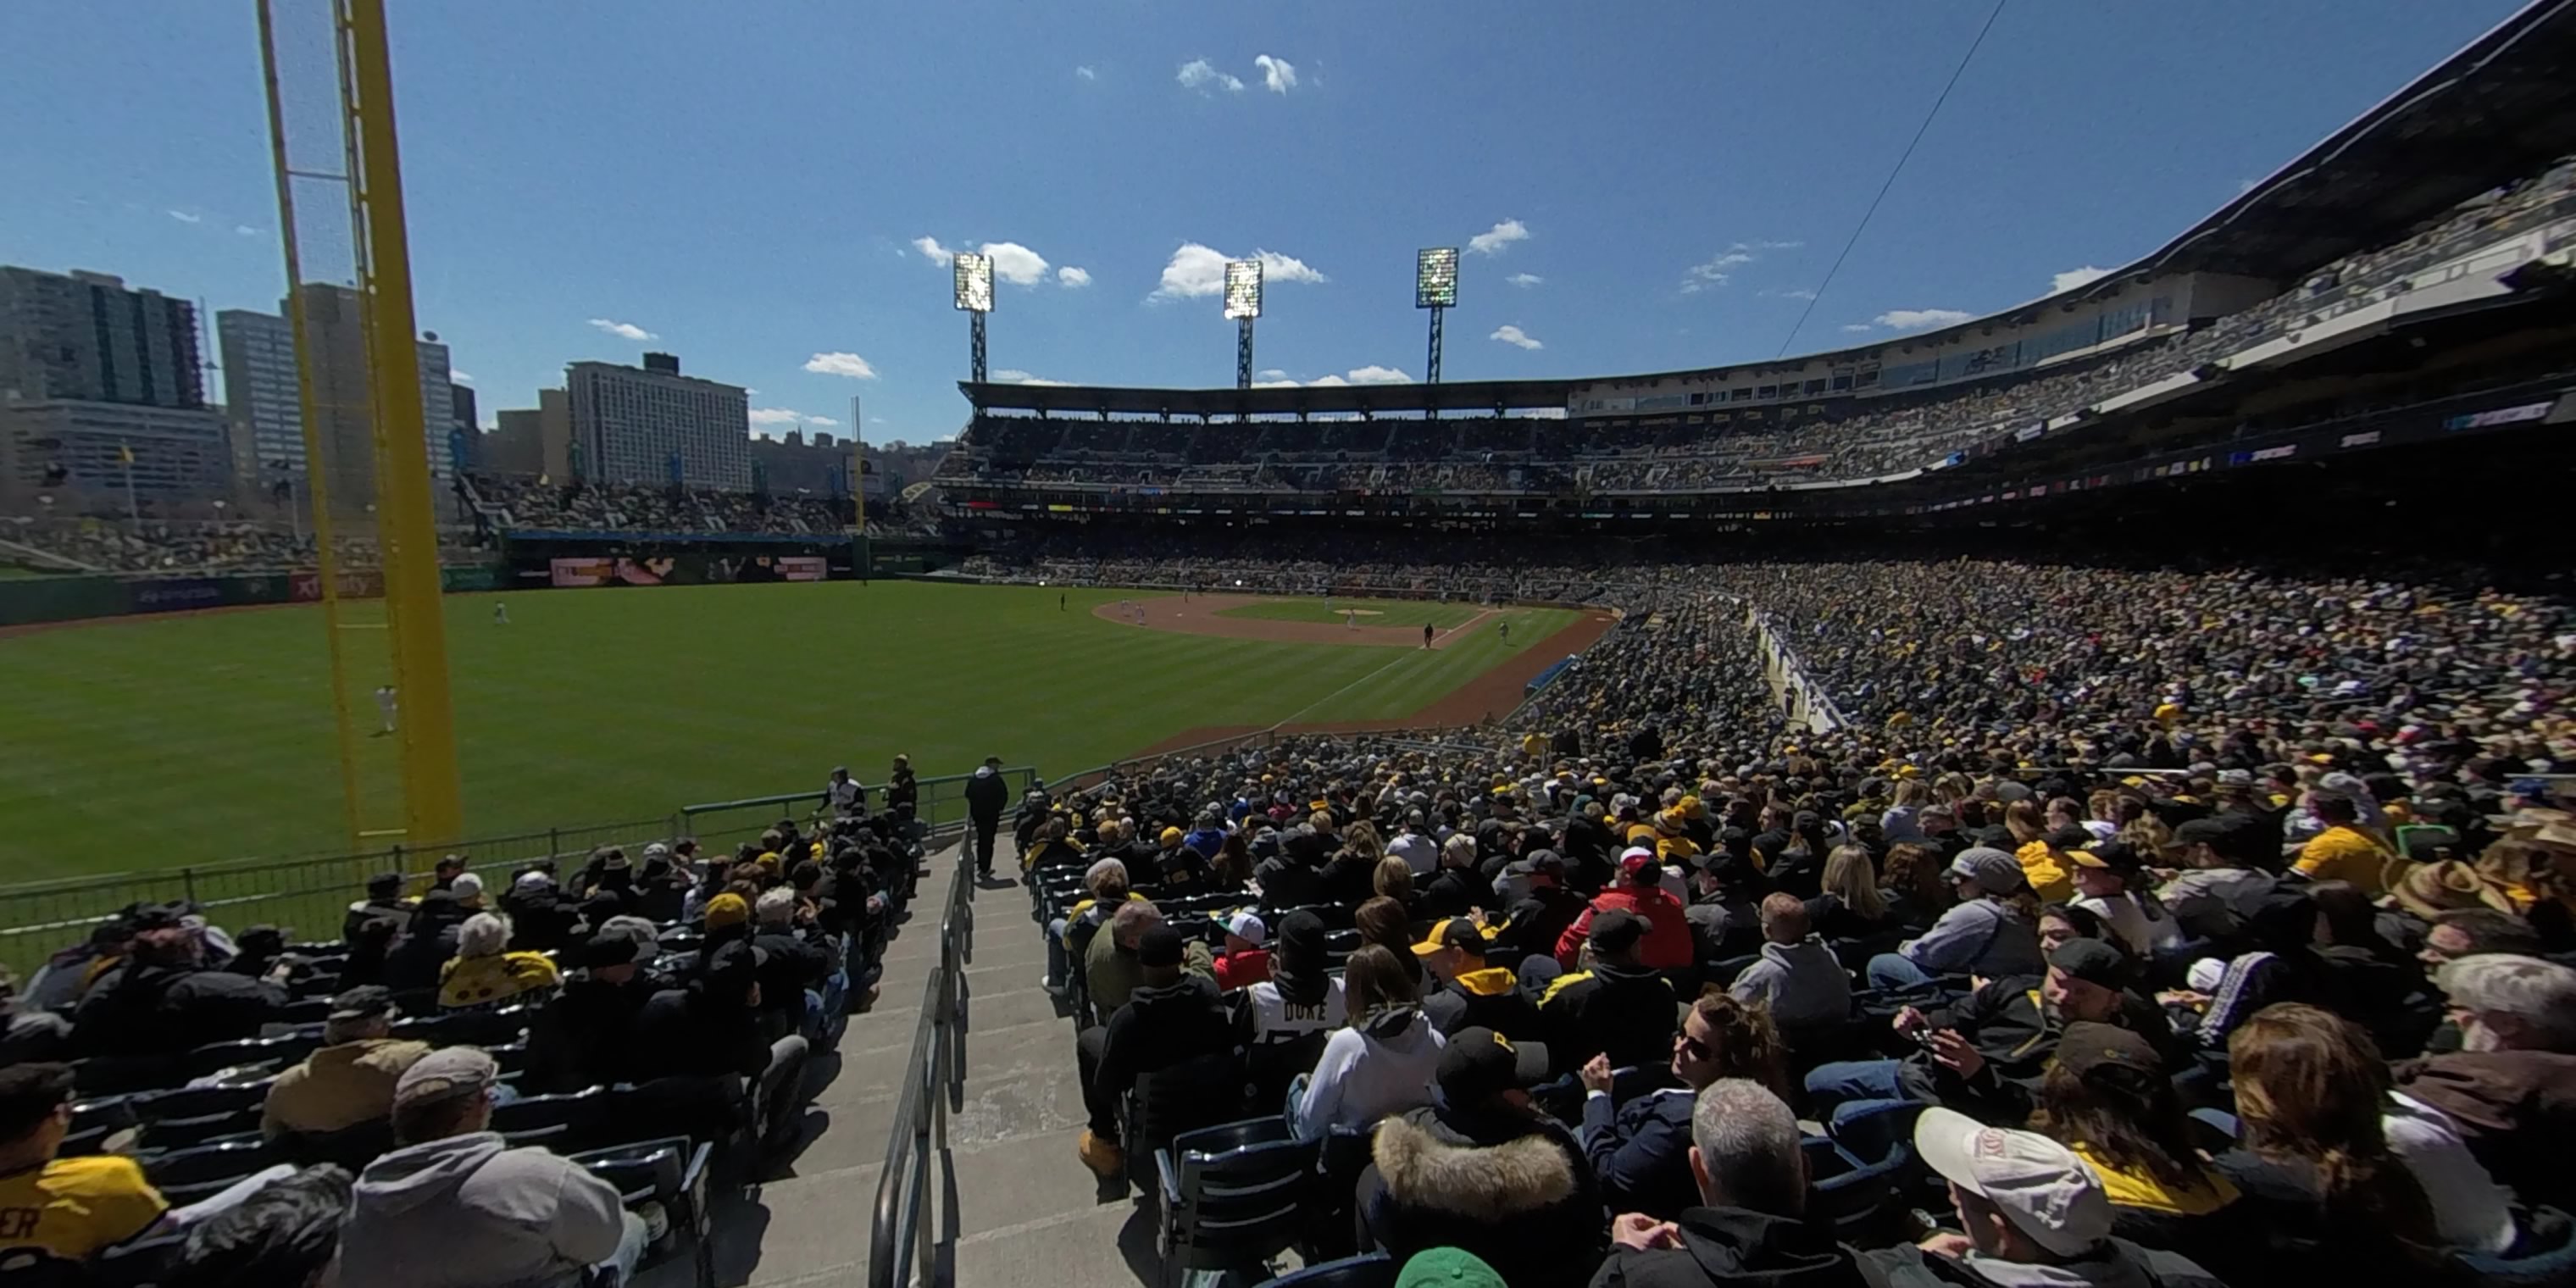 section 132 panoramic seat view  - pnc park